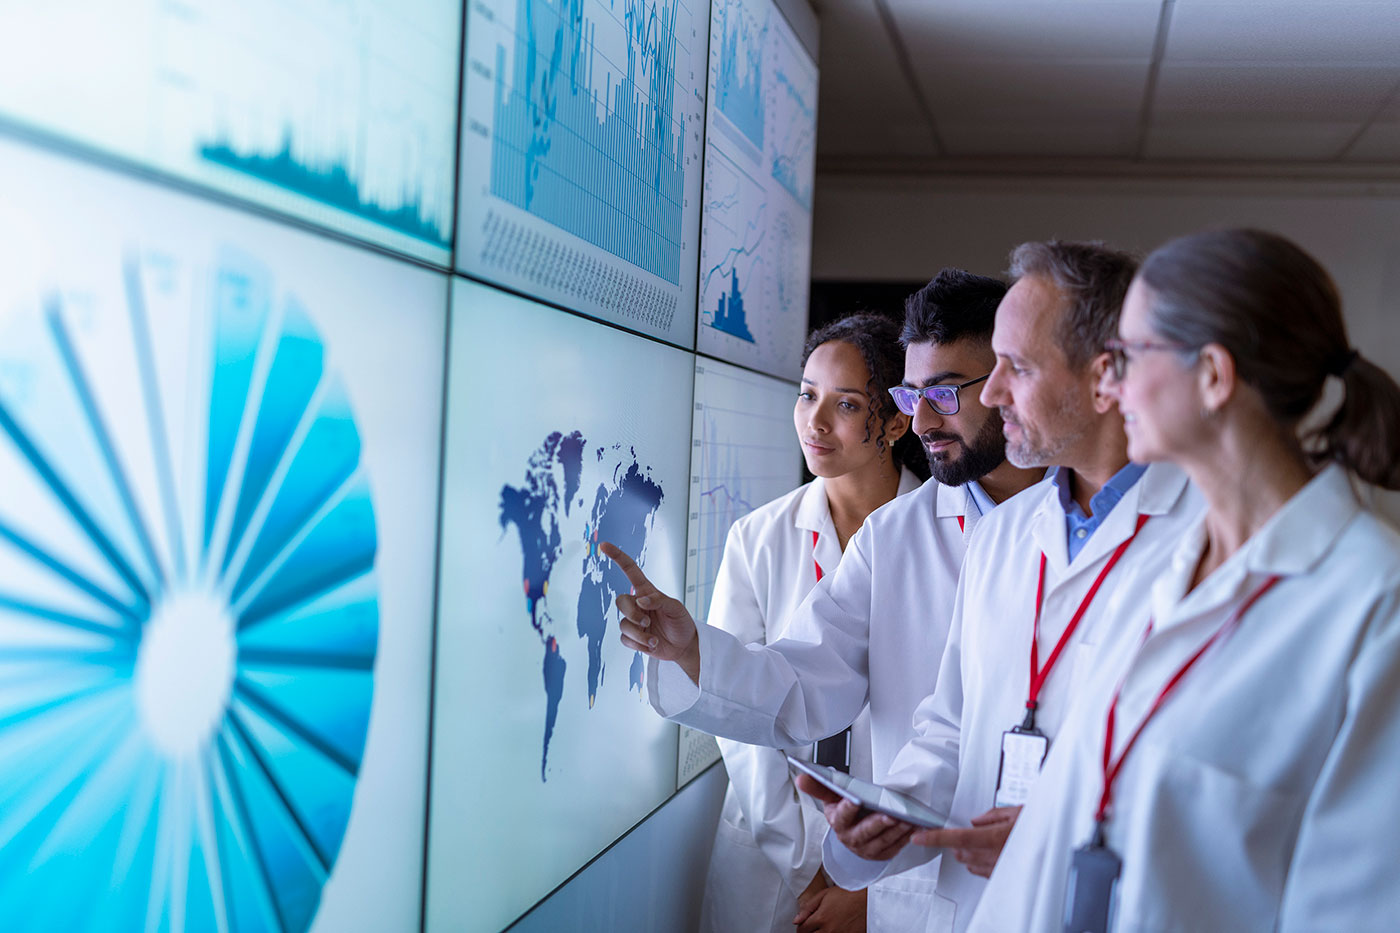 UK, York, Team of researchers inspecting charts on interactive screens